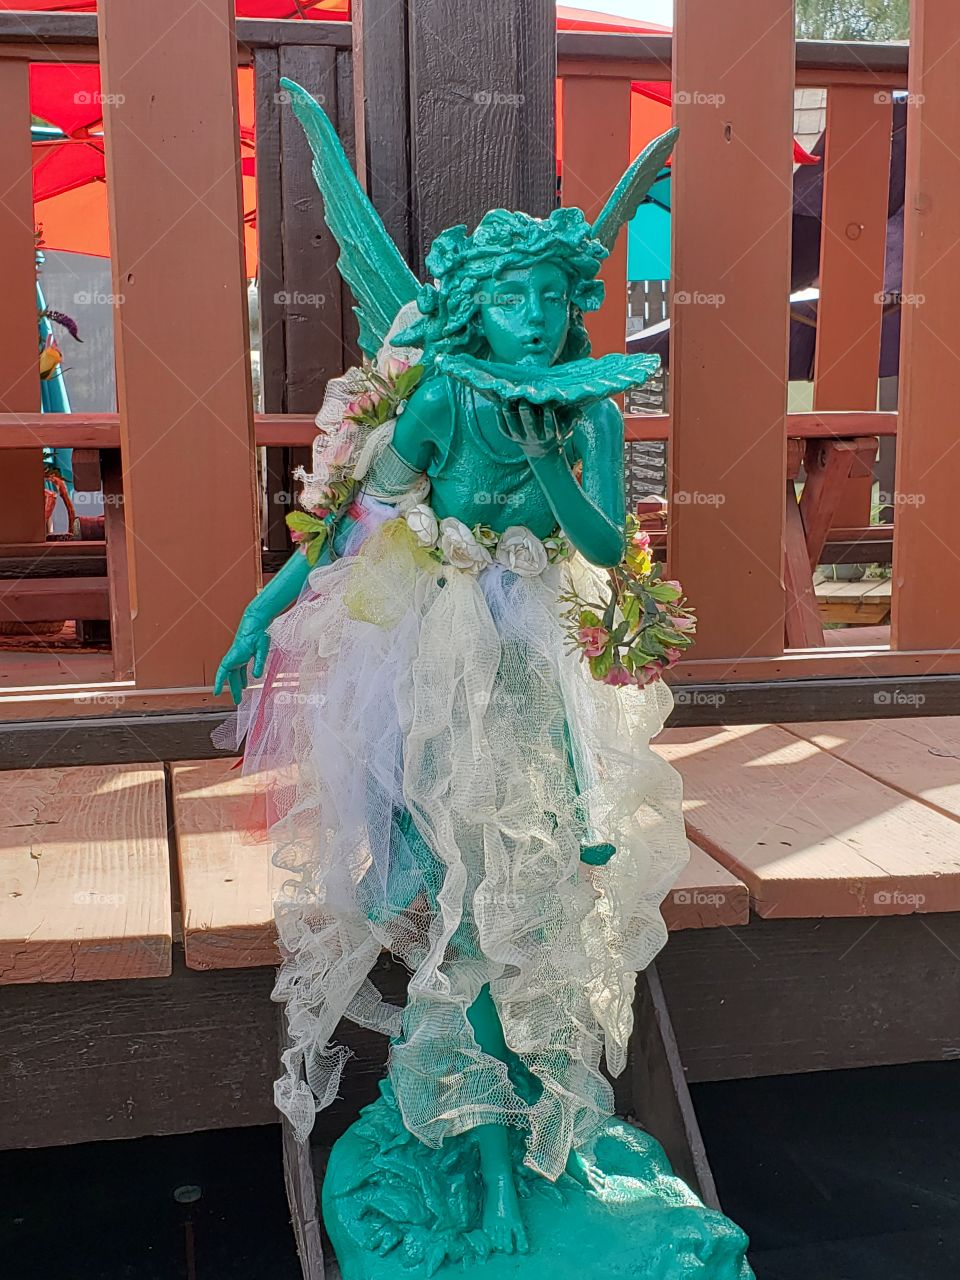 A lovely depiction of a faerie, with touches of color and flora, one of my favorite decorations at the Renessaince Fair this year.